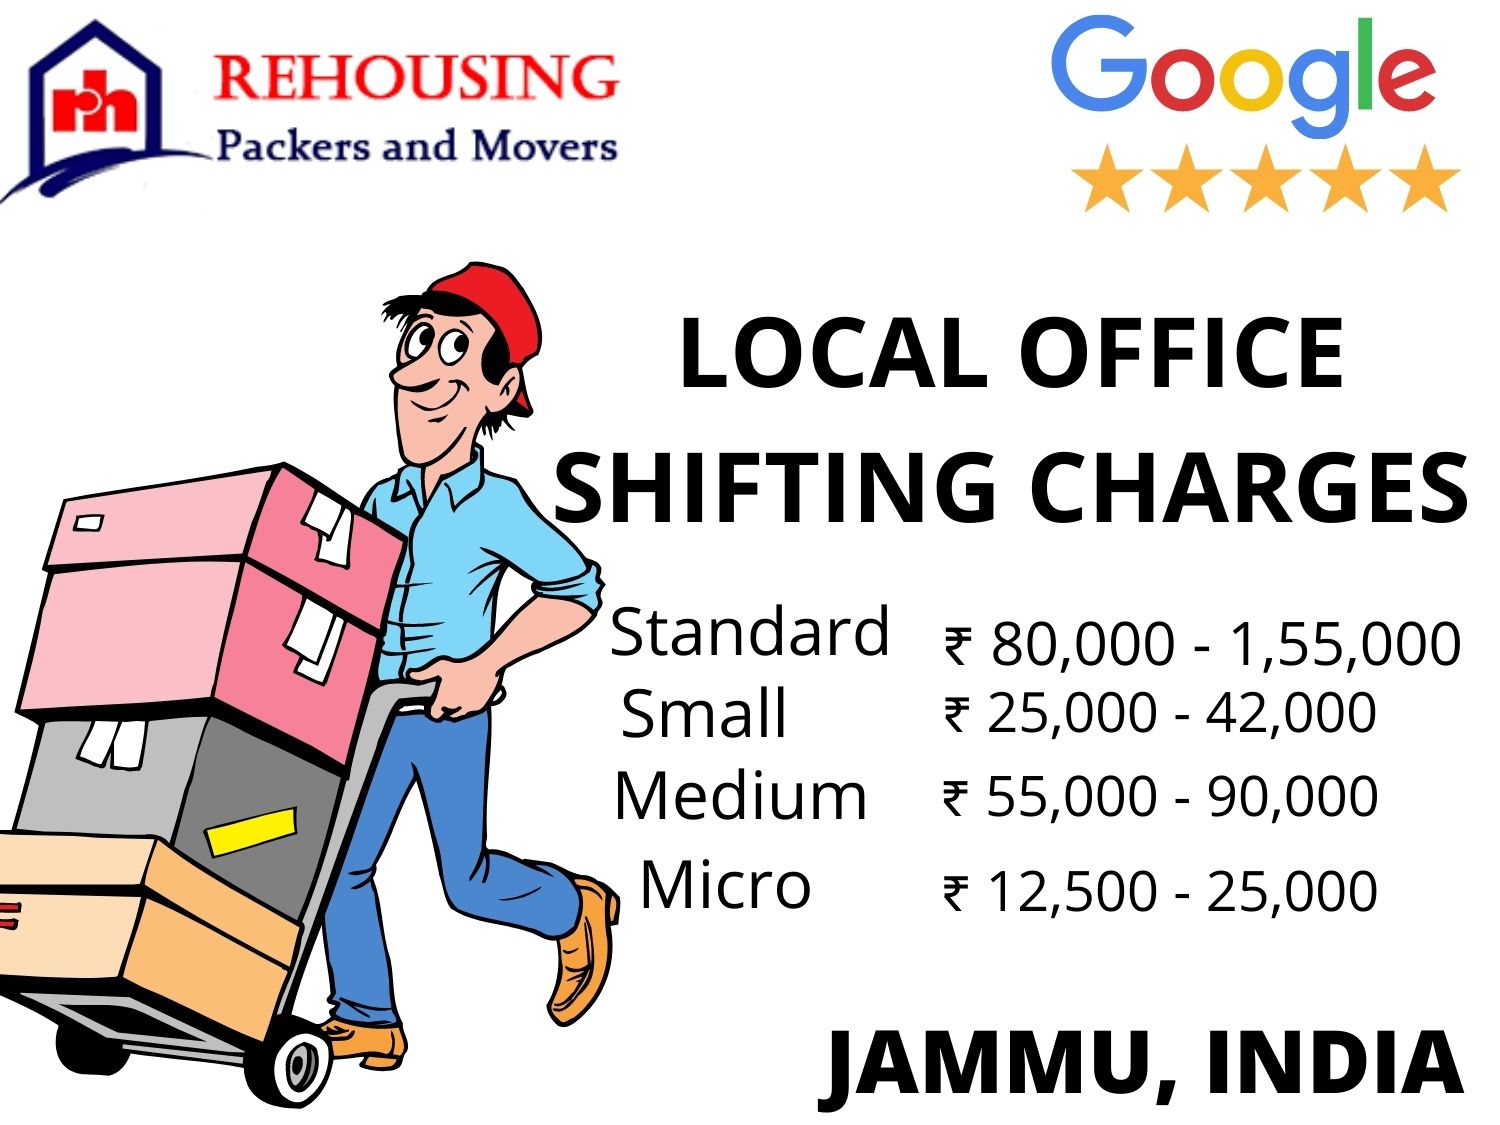 Standard office local shifting charges in Jammu are Rs 70,000 to Rs 1,70,000